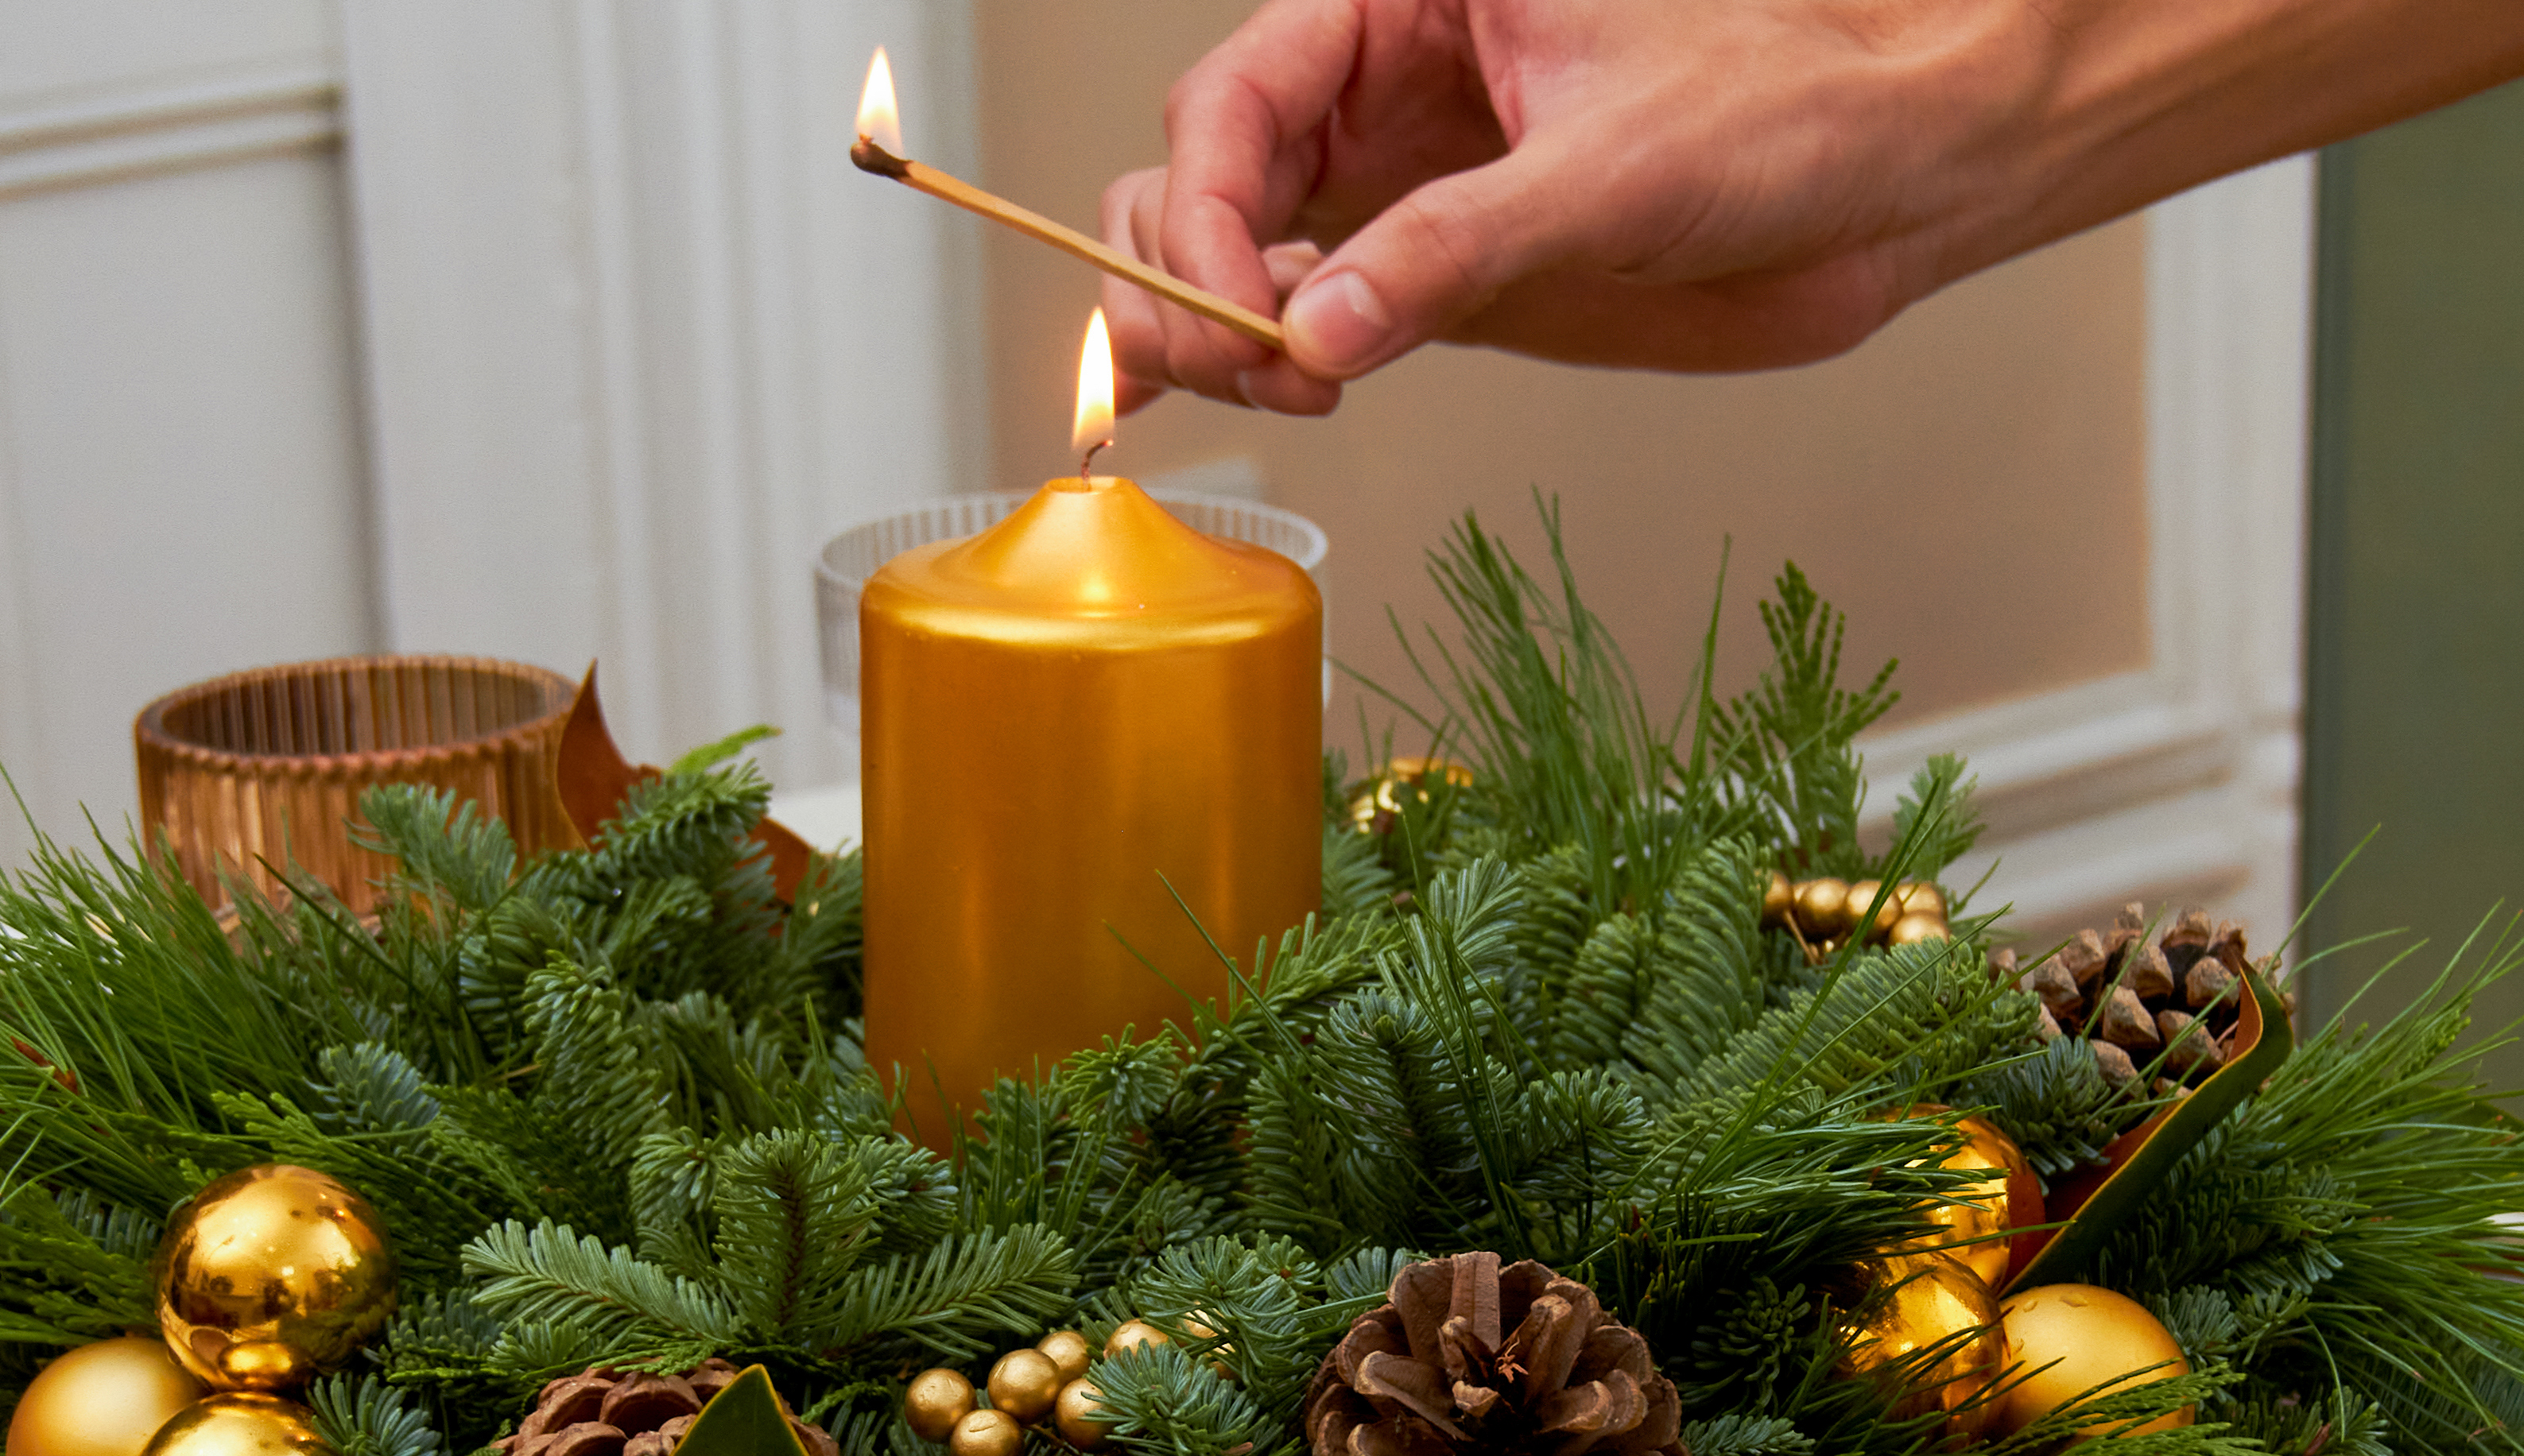 Hand lighting a candle on a holiday centerpiece. 